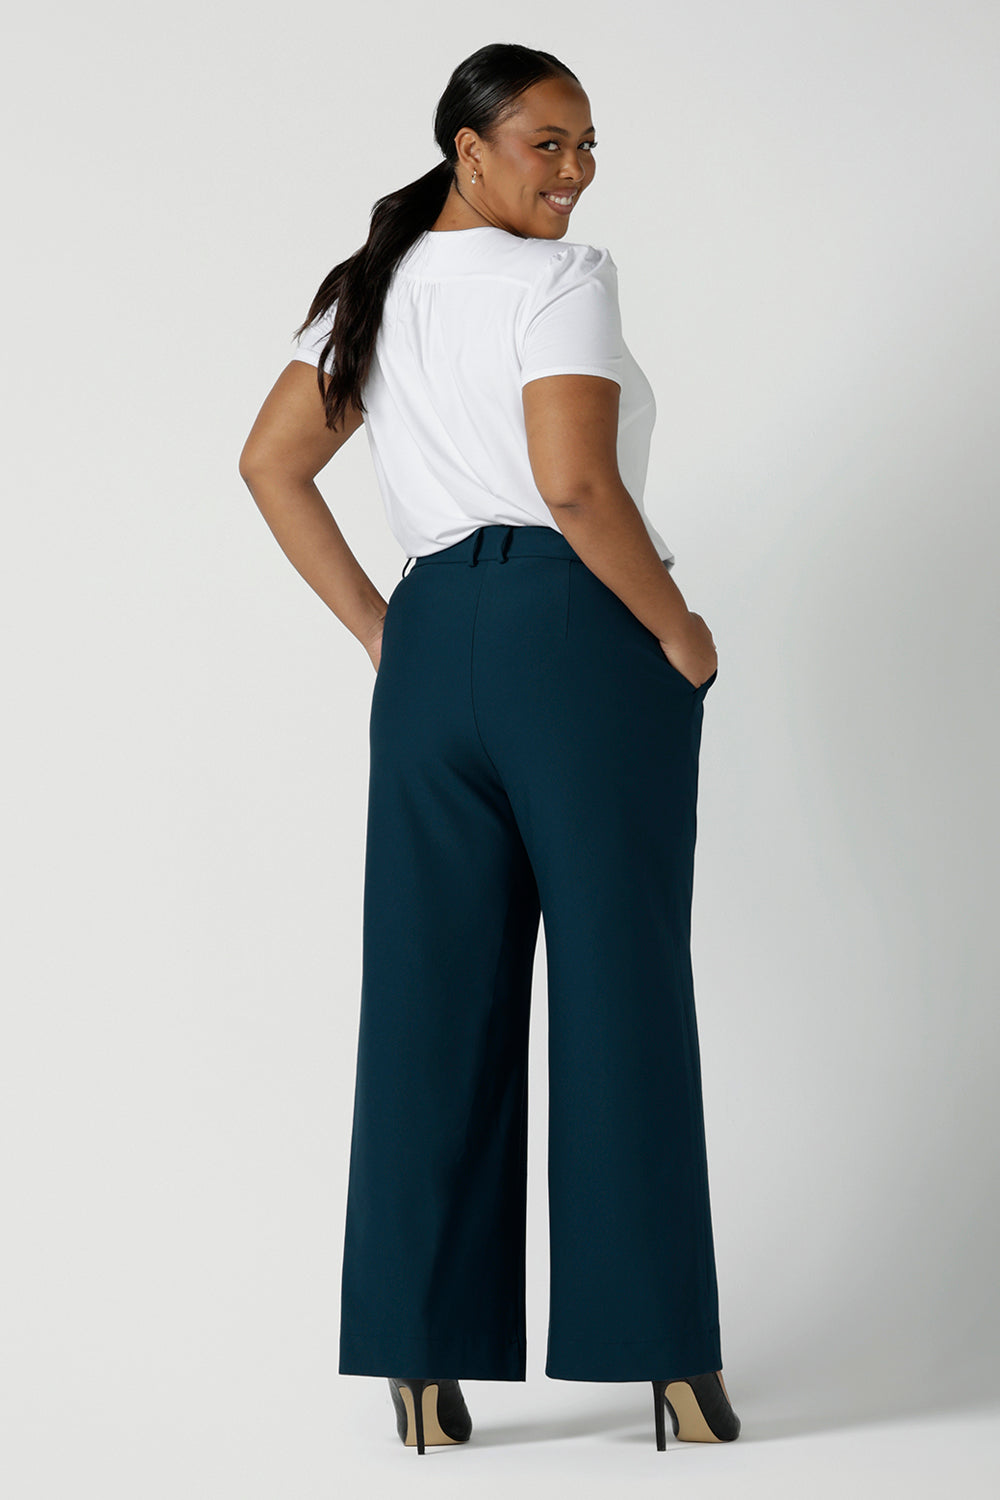 Back view of a size 16 woman wears the Yael pant in Petrol. A high waist tailored pant with tailoring elements like side pockets, zip front and belt loops. Full length wide leg pant suitable for comfortable workwear with a statement Petrol colour. Styled back with white Evan top in white bamboo. Made in Australia for women size 8 - 24.